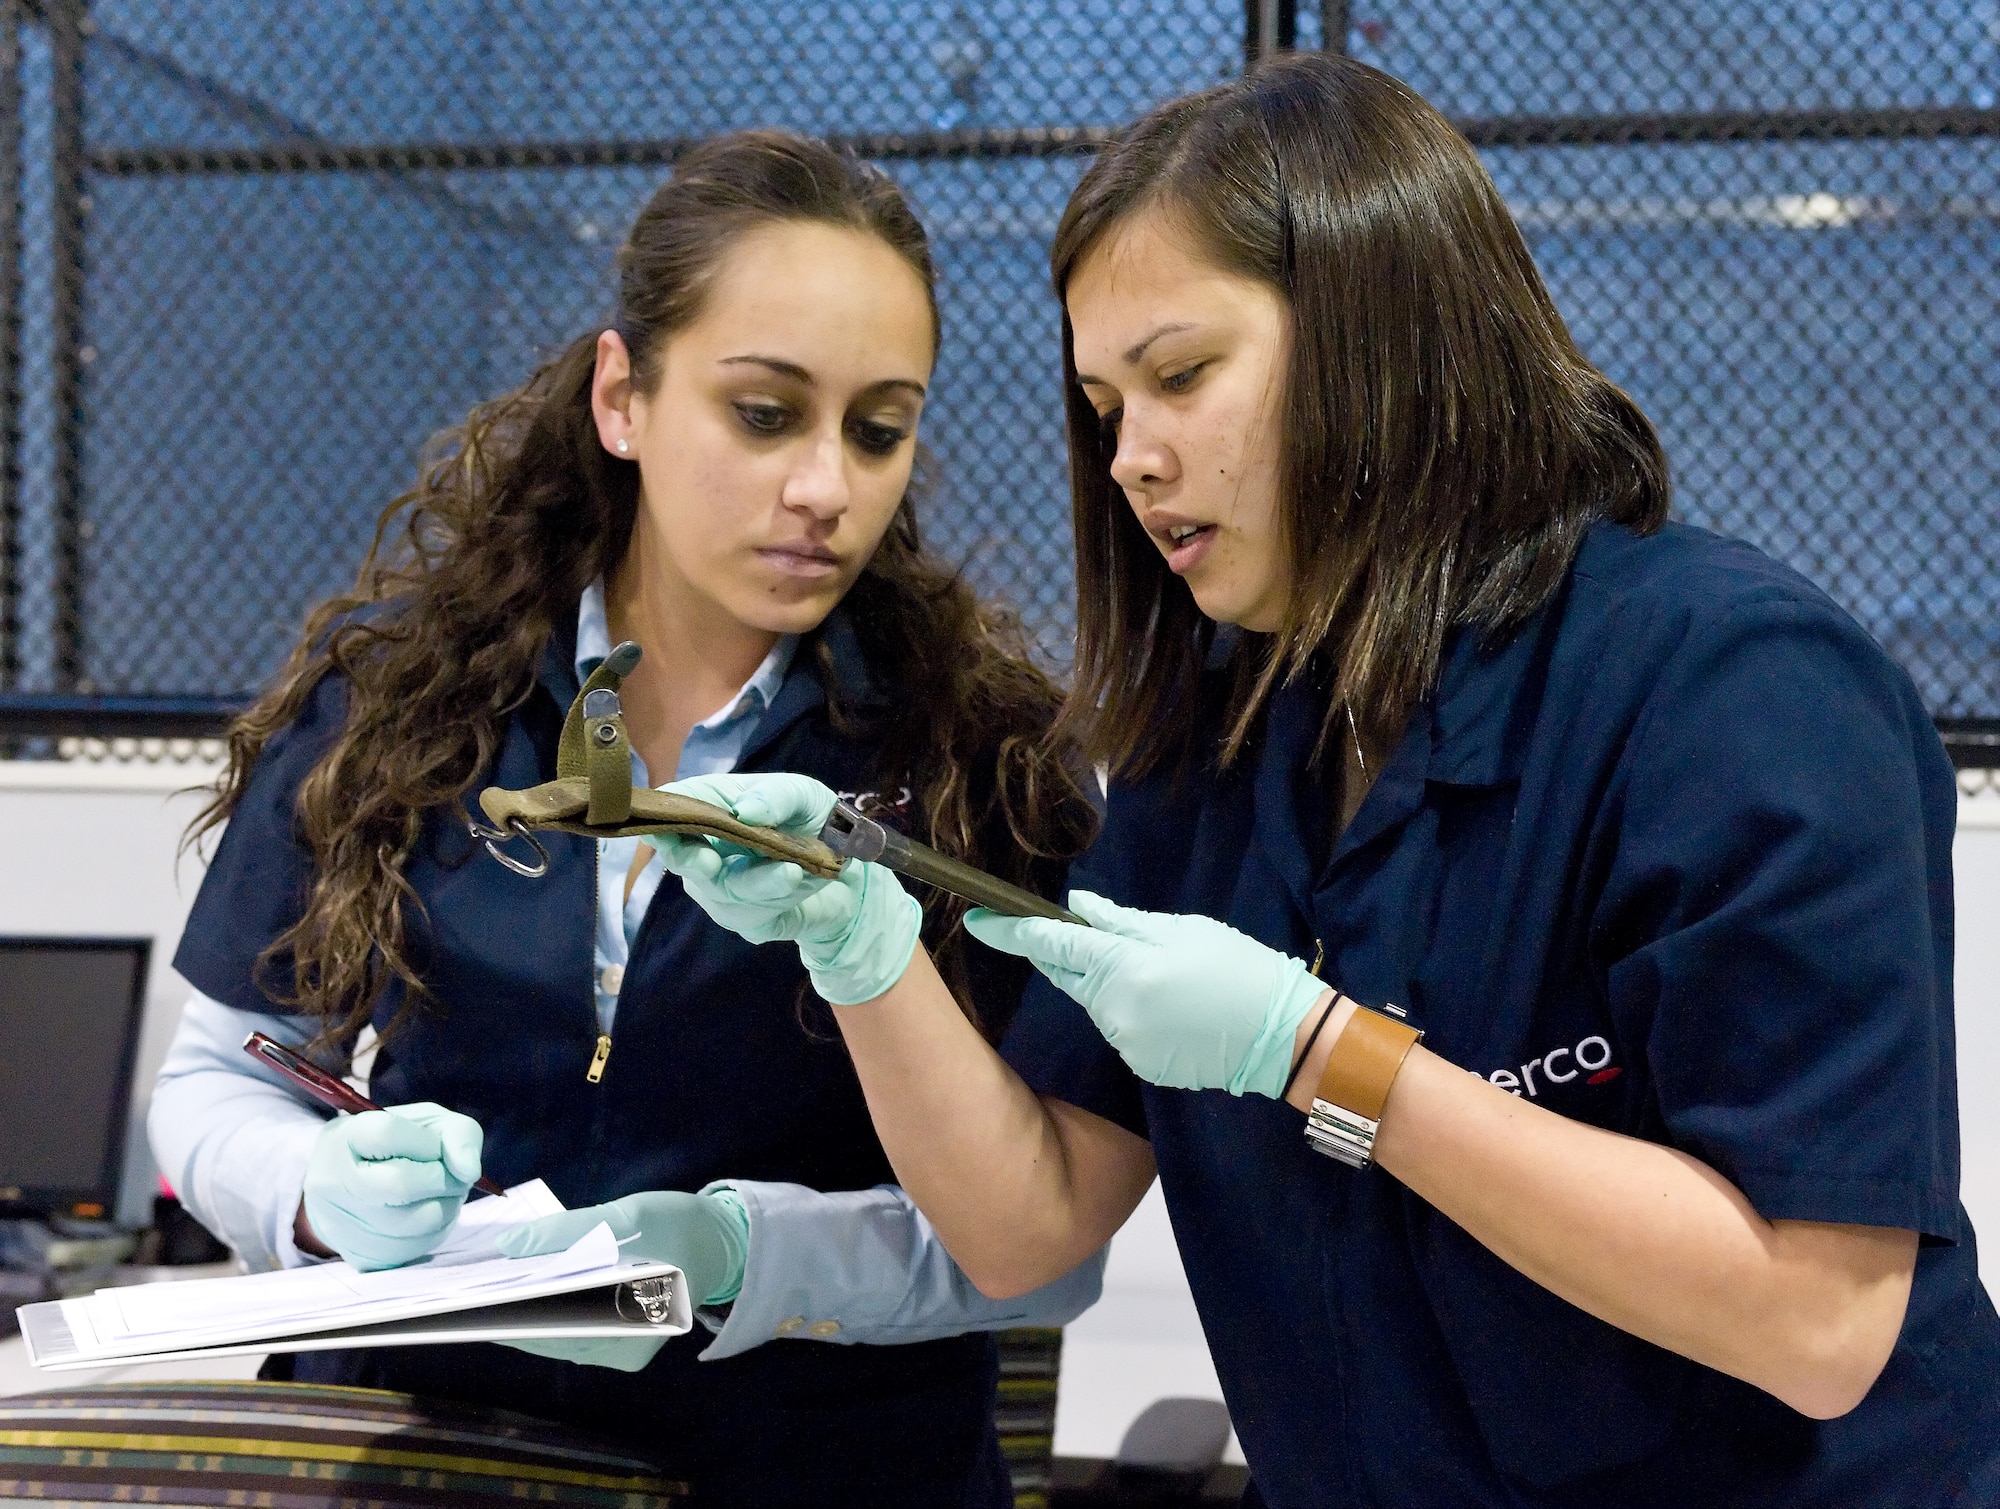 Virginia Garcia, left, and Dawn Senidoleitch demonstrate how to catalogue and document personal effects April 14, 2011, at the new Joint Personal Effects Depot at Dover Air Force Base, Del. (U.S. Air Force photo by Roland Balik)